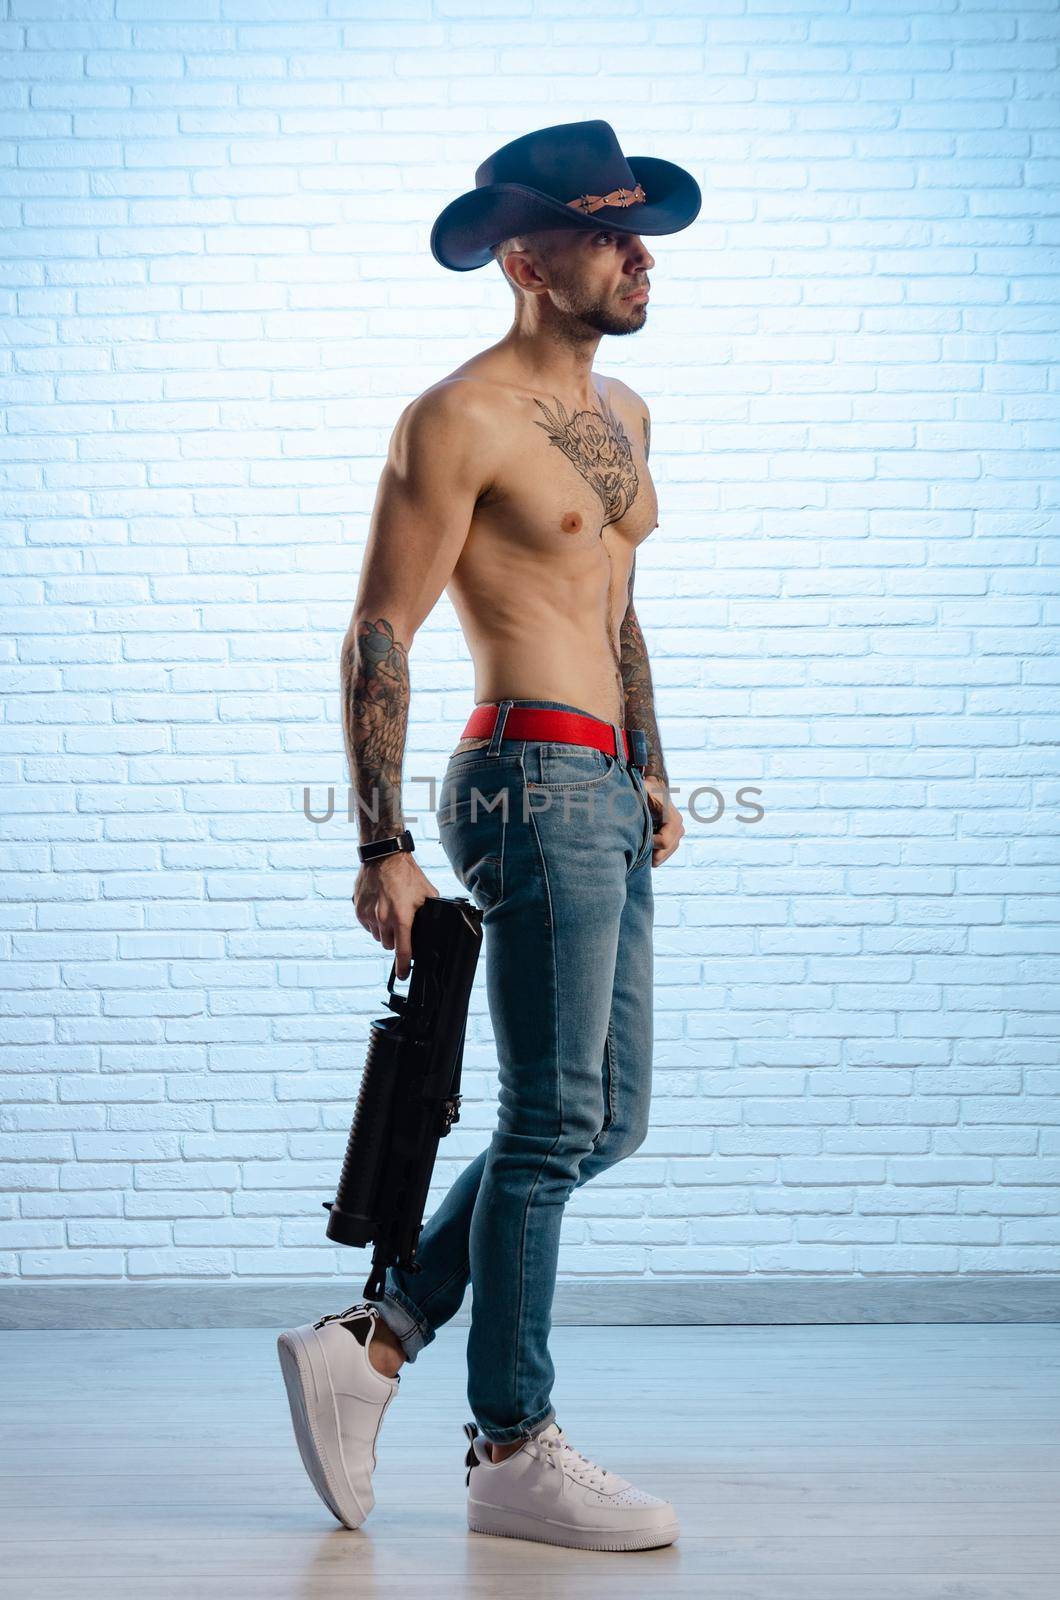 the fashionable slim guy with a bare torso in tattoos, jeans and a cowboy hat with a gun